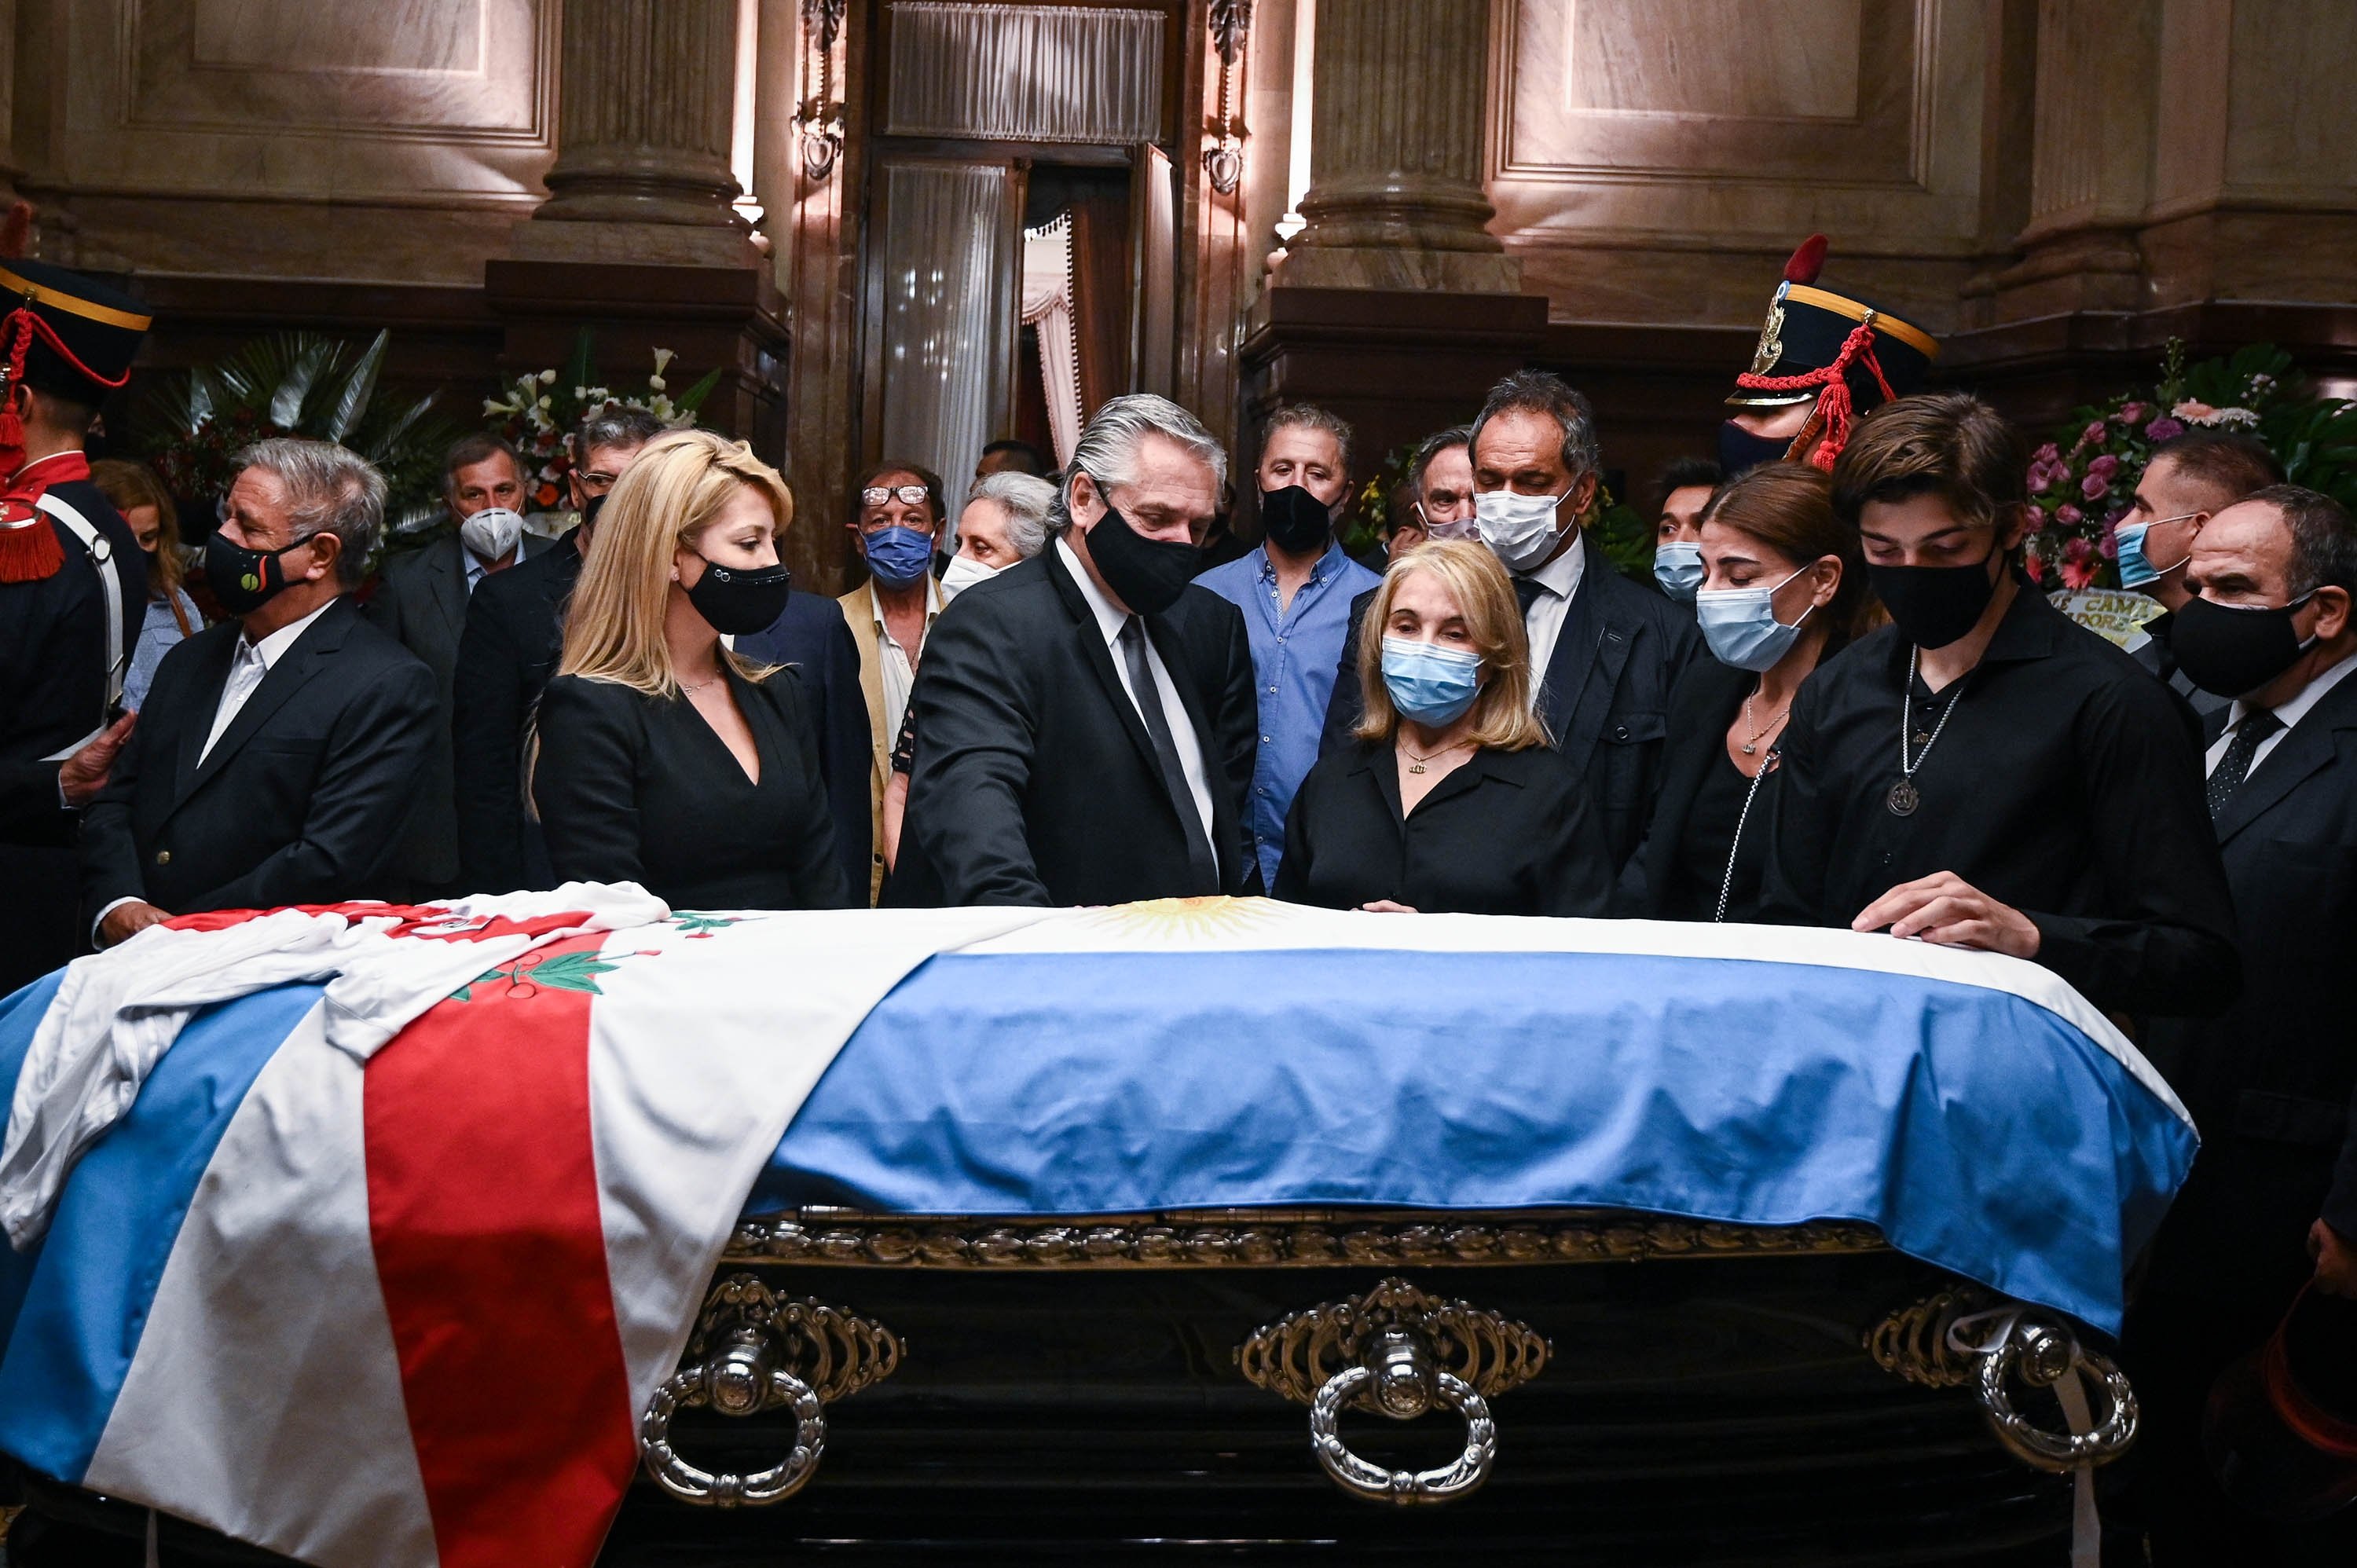 Handout picture released by the Argentine Senate showing Argentine President Alberto Fernandez (C), his partner Fabiola Yanez (2-L), Zulema Menem (3-R), her mother Zulema Yoma and his elder son Luca Bertoldi Menem standing around the coffin with the remains late former Argentine president (1989-1999) and senator Carlos Saul Menem, as he lies in state at the Congress for the wake in Buenos Aires on Feb. 14, 2021. (Photo by Charly Diaz Azcue, Argentine Senate via AFP)